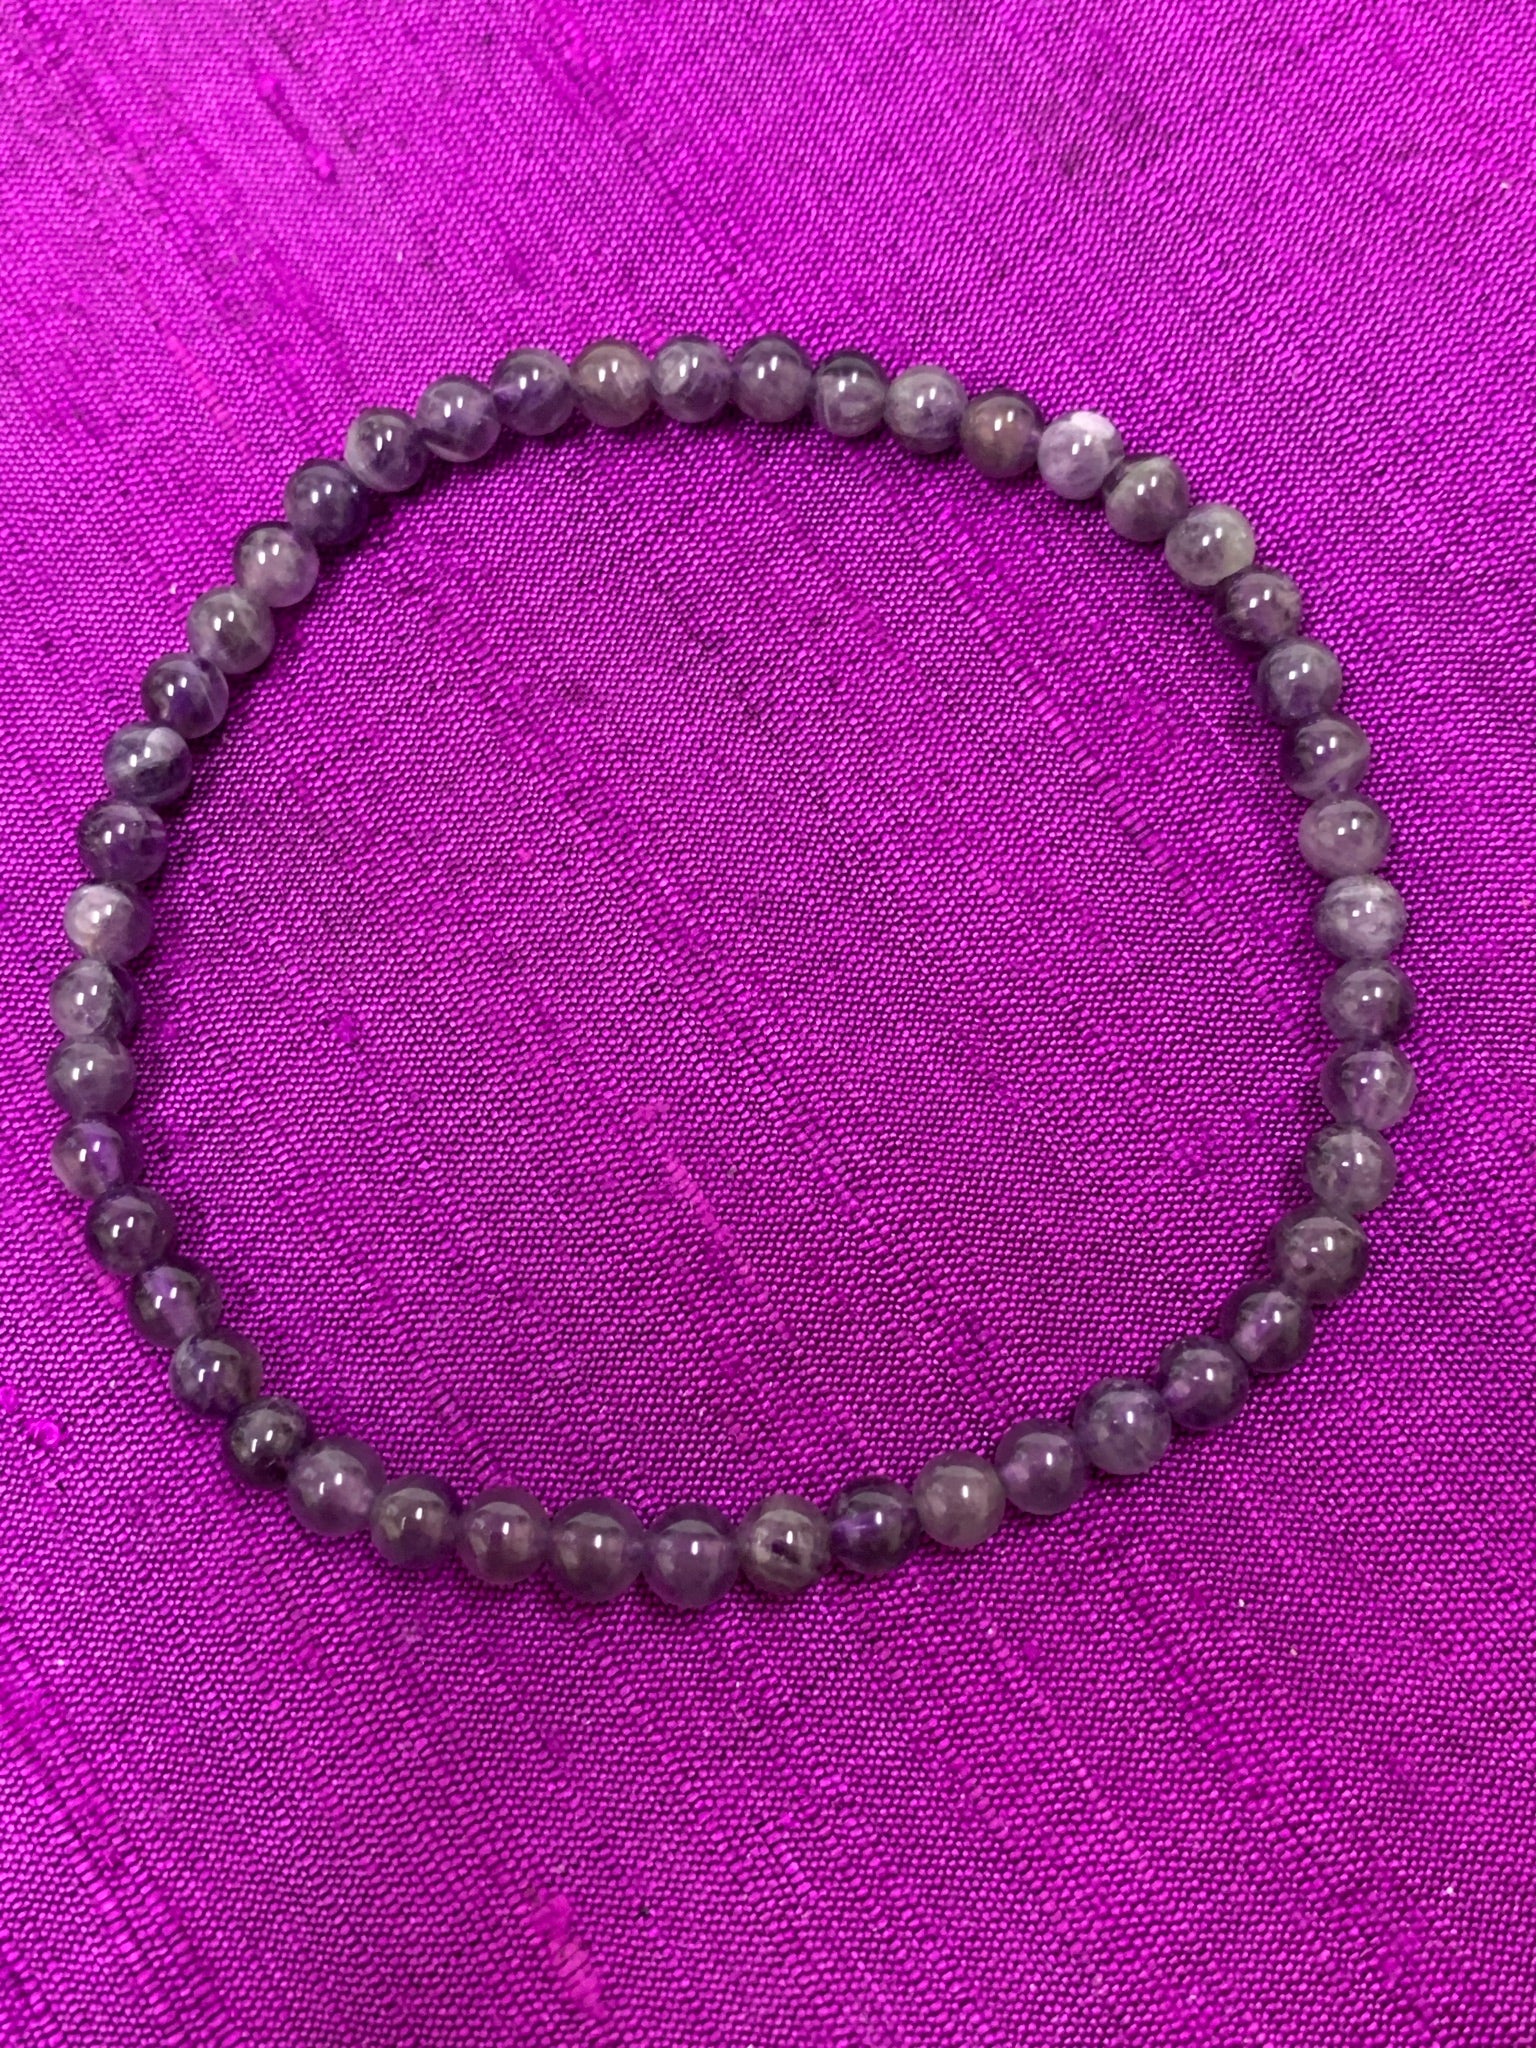 Close-up view. Petite amethyst 4mm power bracelet. Tiny and mighty, this bracelet puts the power of amethyst right around your wrist. Buy one or wear them and share them - they come in a variety of gemstone choices.